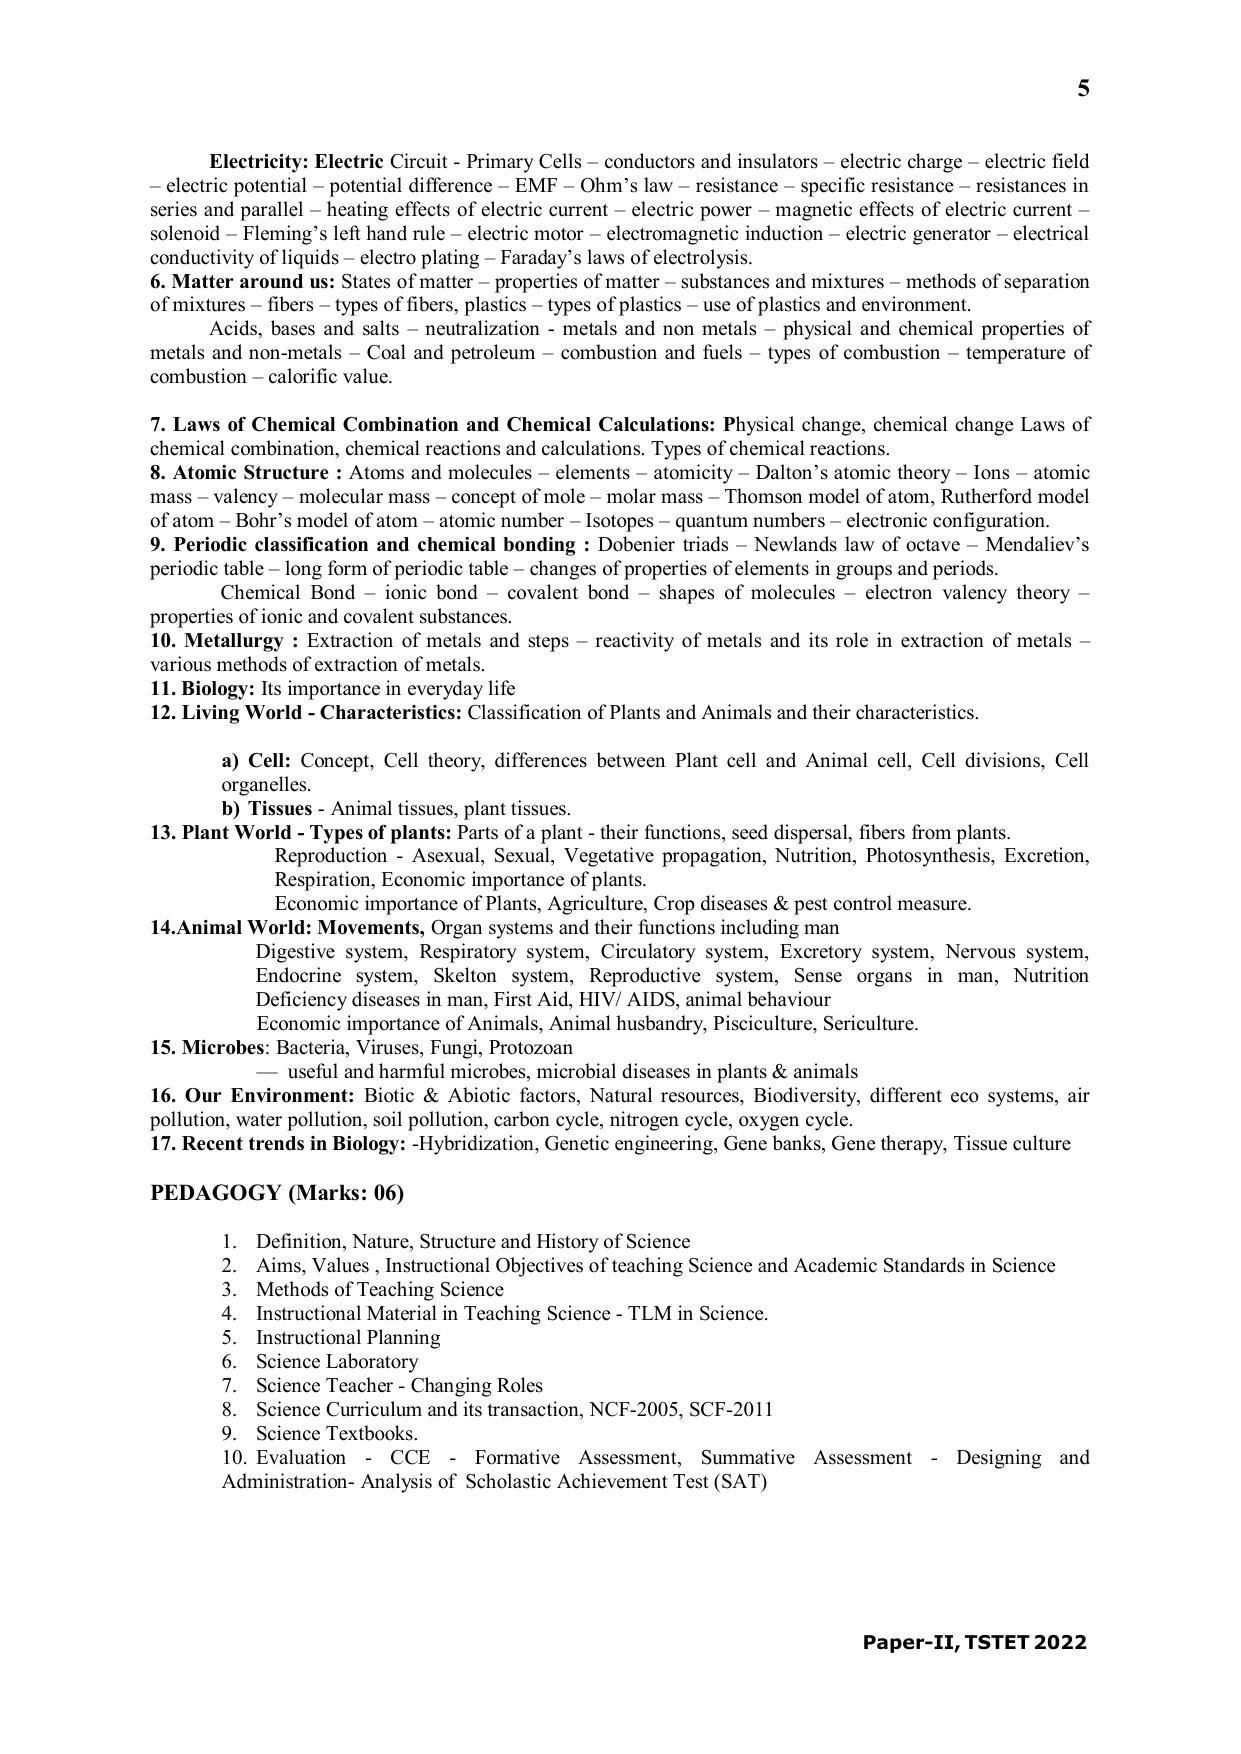 TS TET Syllabus for Paper 2 (Tamil) - Page 5